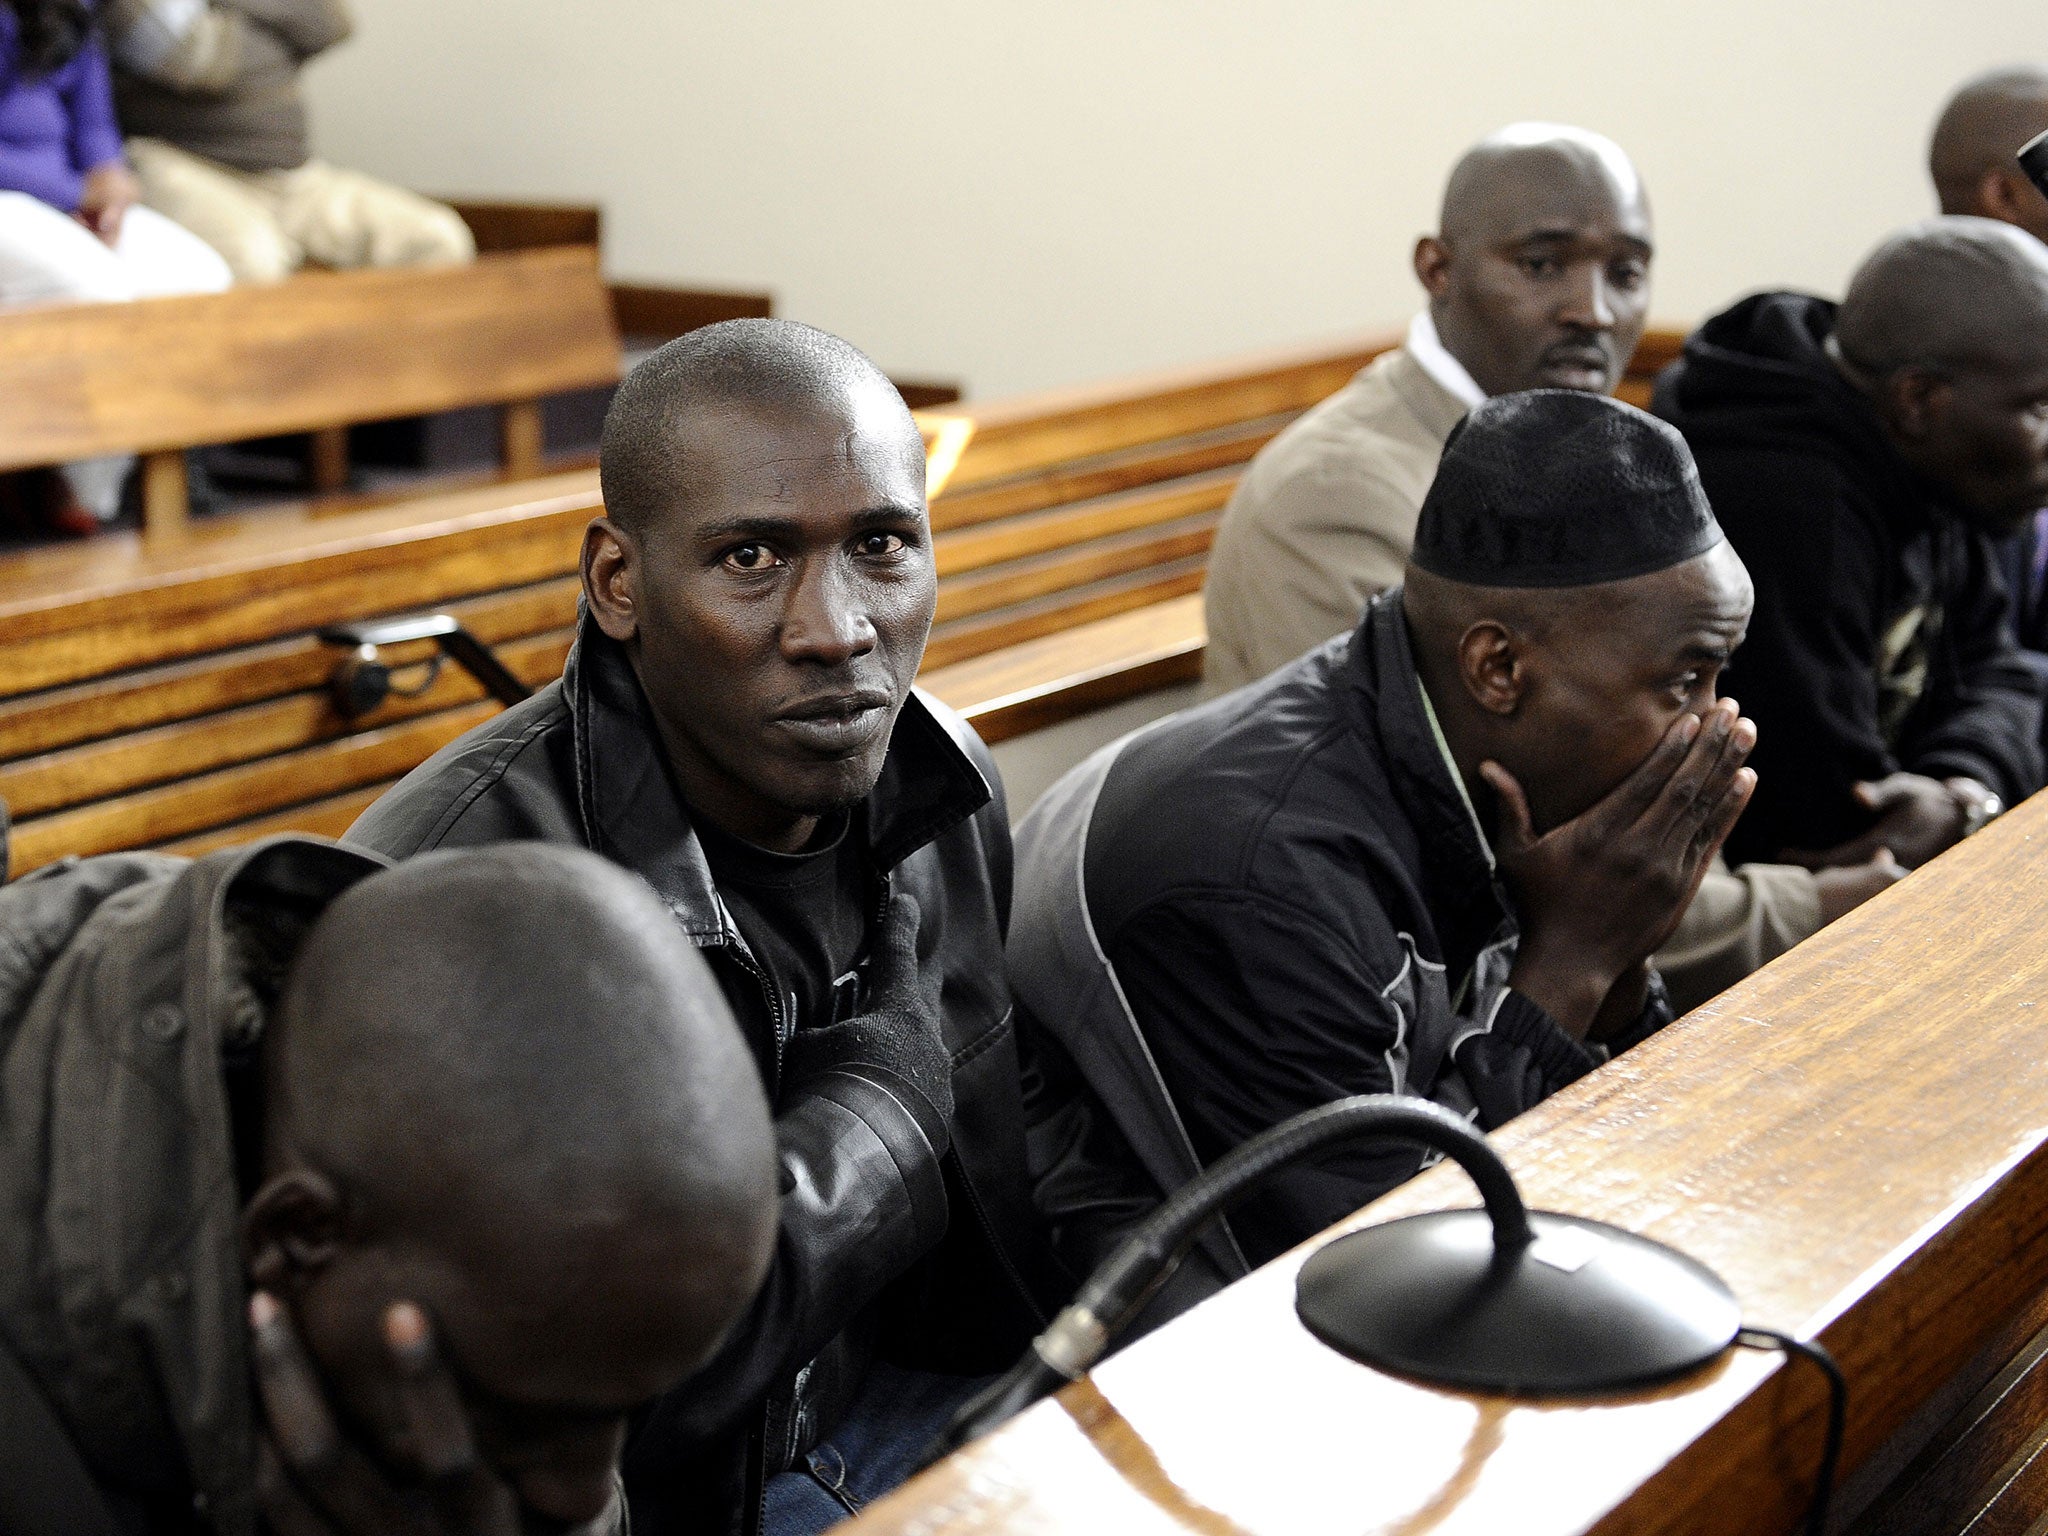 Six men charged with attempting to kill Rwanda’s former army chief Faustin Kayumba Nyamwasa sit in court in Johannesburg. Four of them were convicted of attempted assassination yesterday